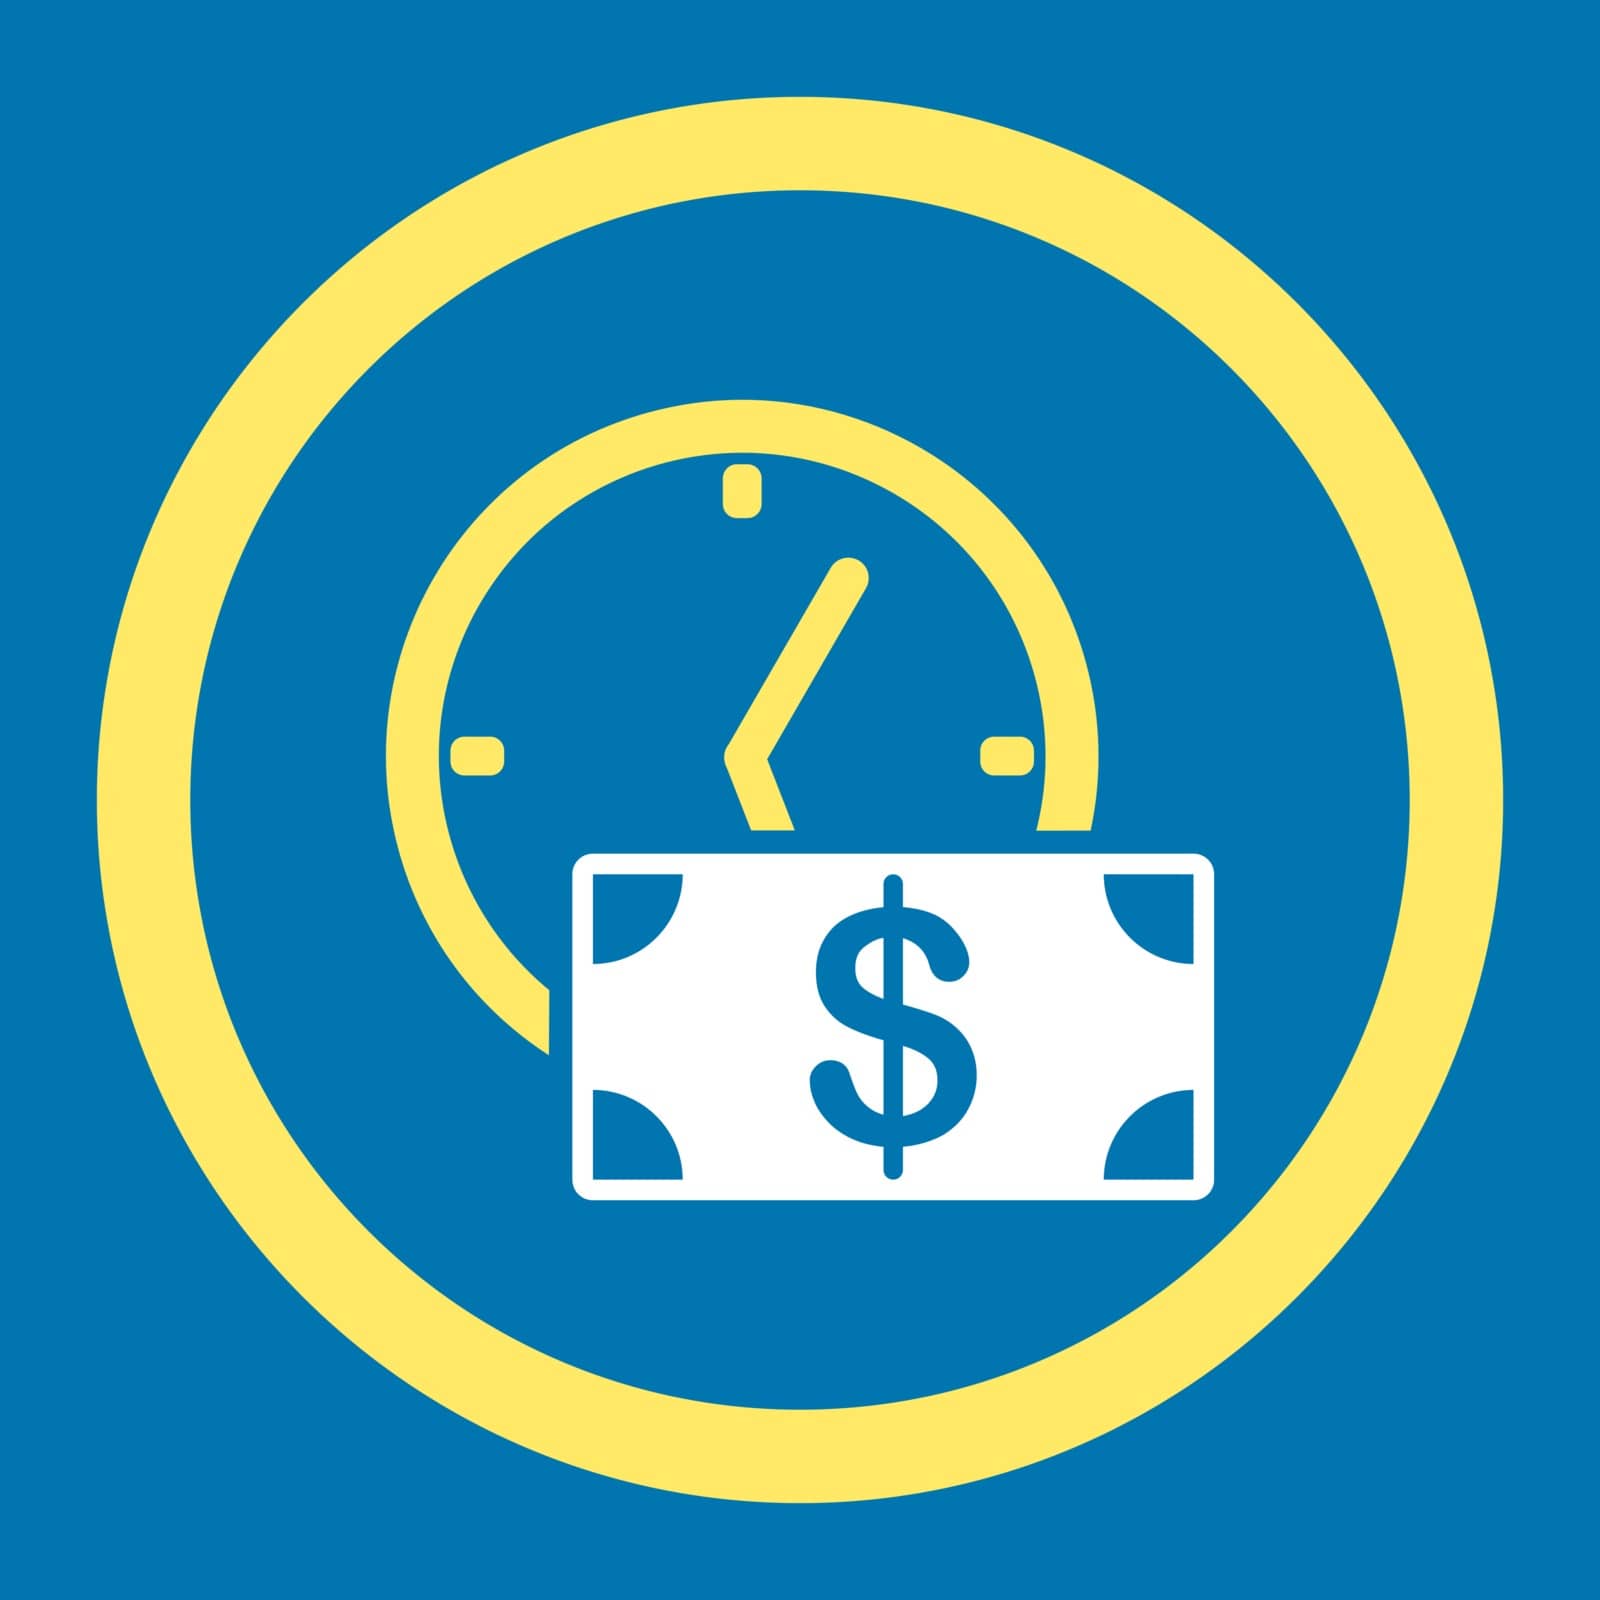 Credit vector icon. This flat rounded symbol uses yellow and white colors and isolated on a blue background.